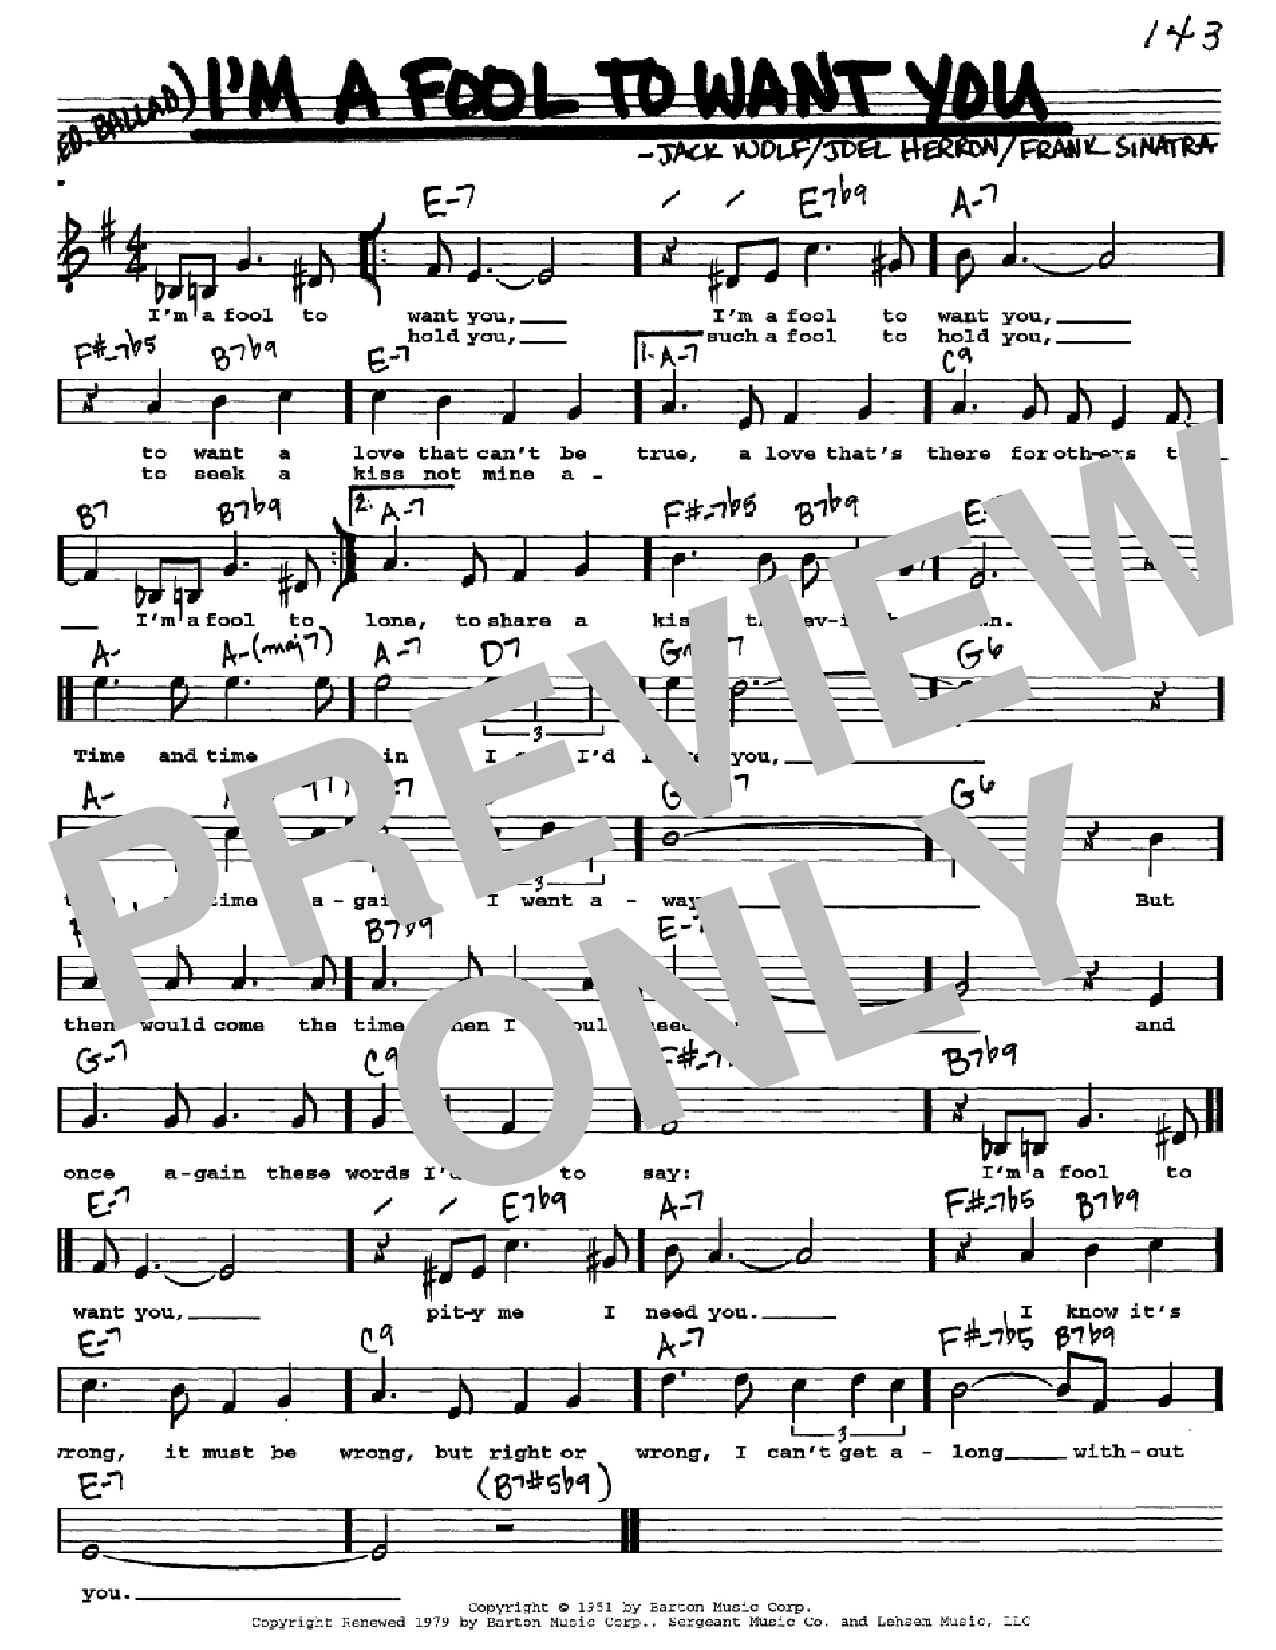 Download Frank Sinatra I'm A Fool To Want You Sheet Music